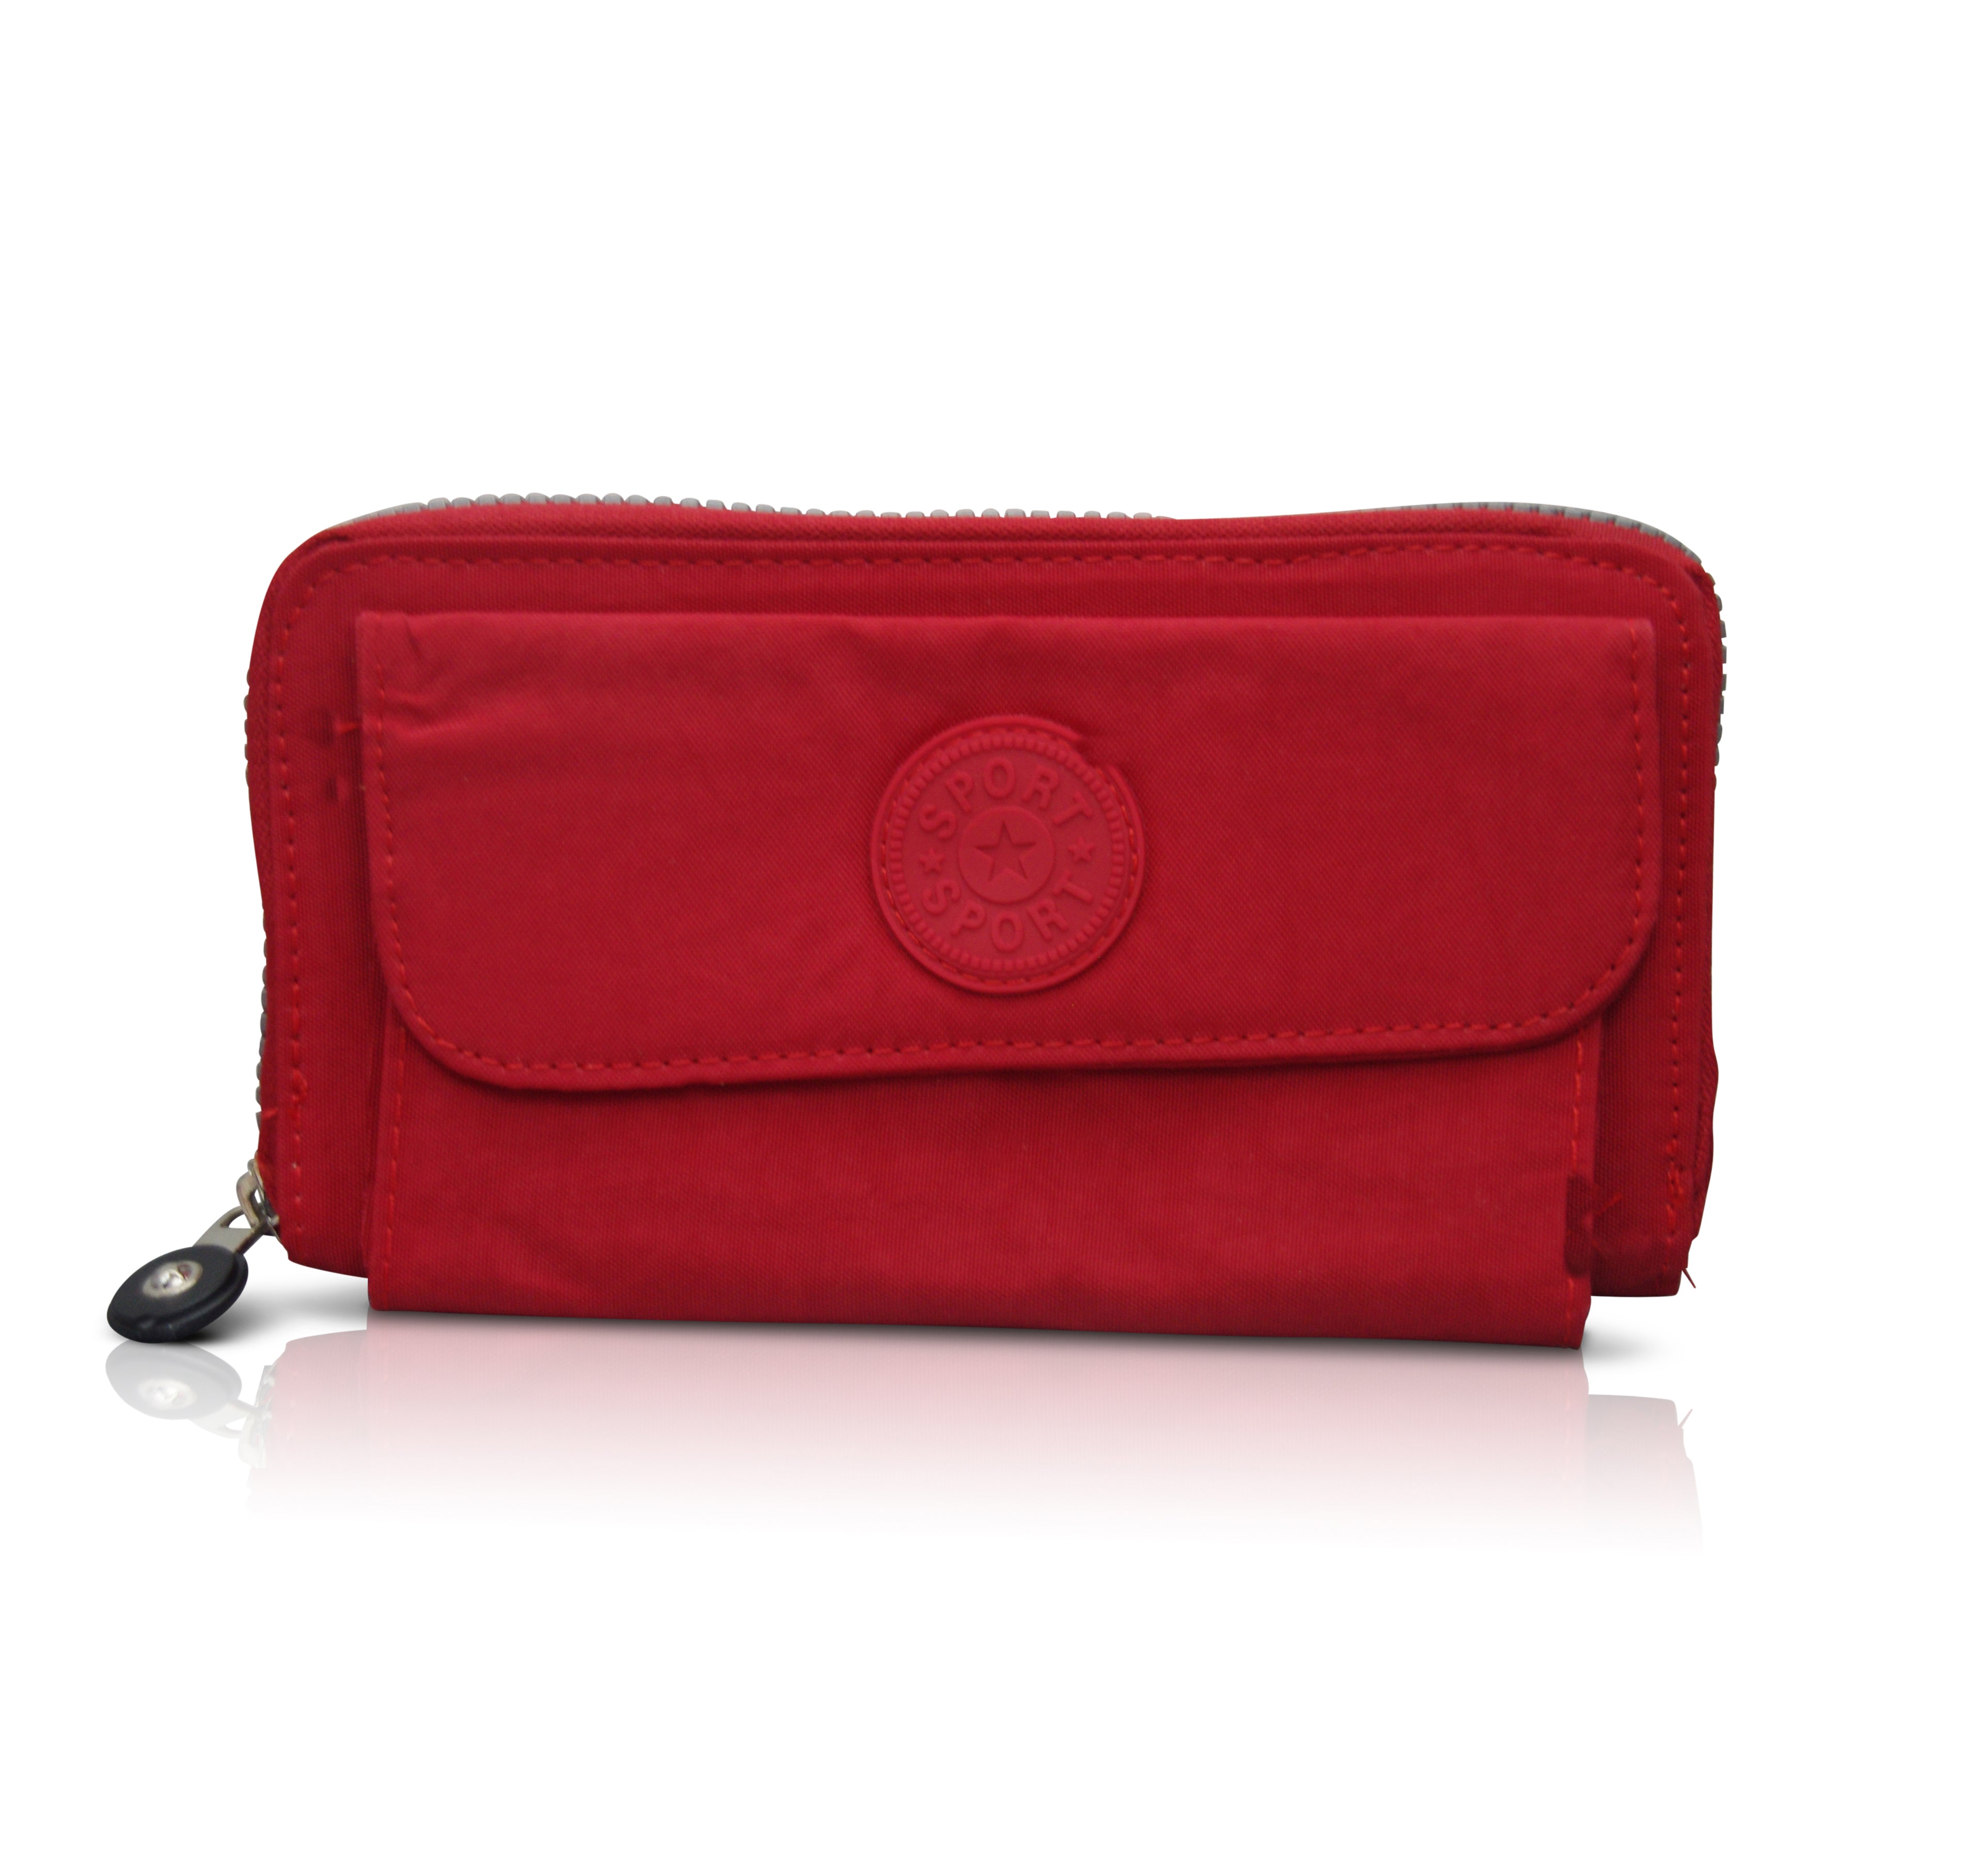 Cienna - KP19008 Large Zip Wallet with Phone Pouch - Red